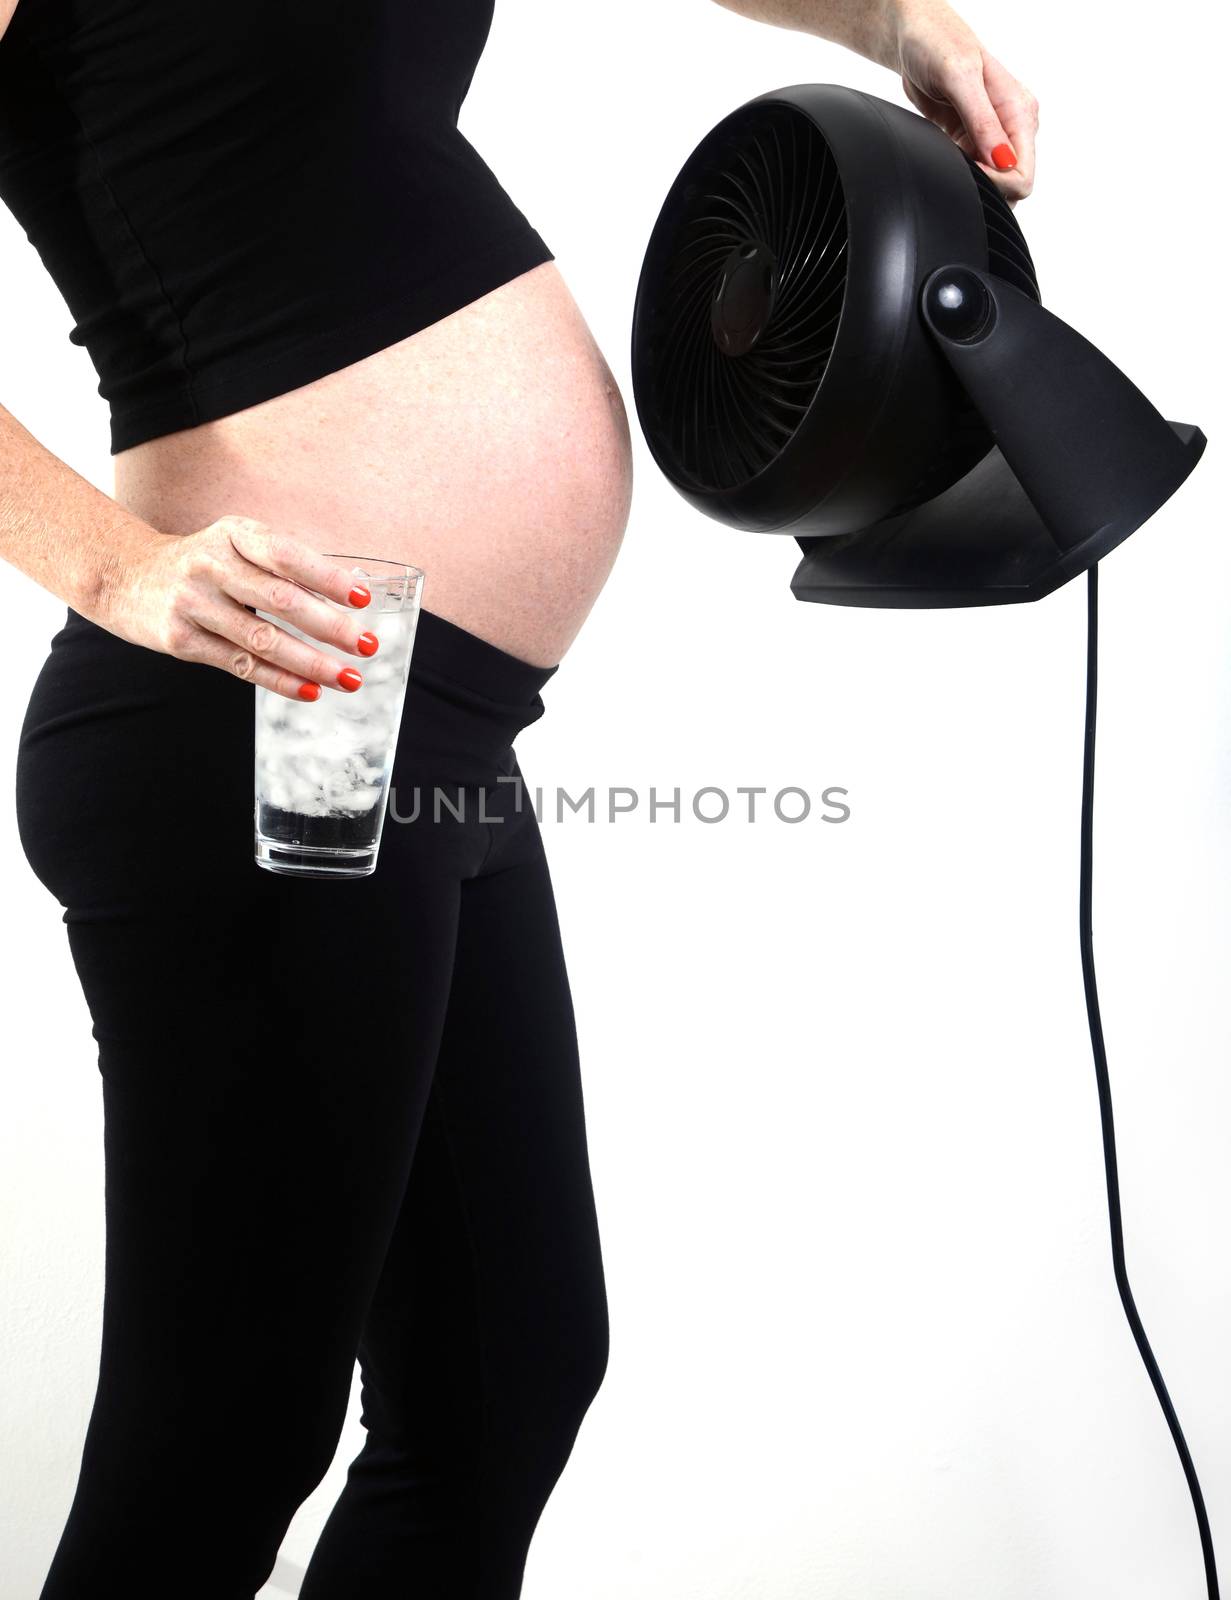 hot pregnant woman trying to cool down from hot flash during pregnancy